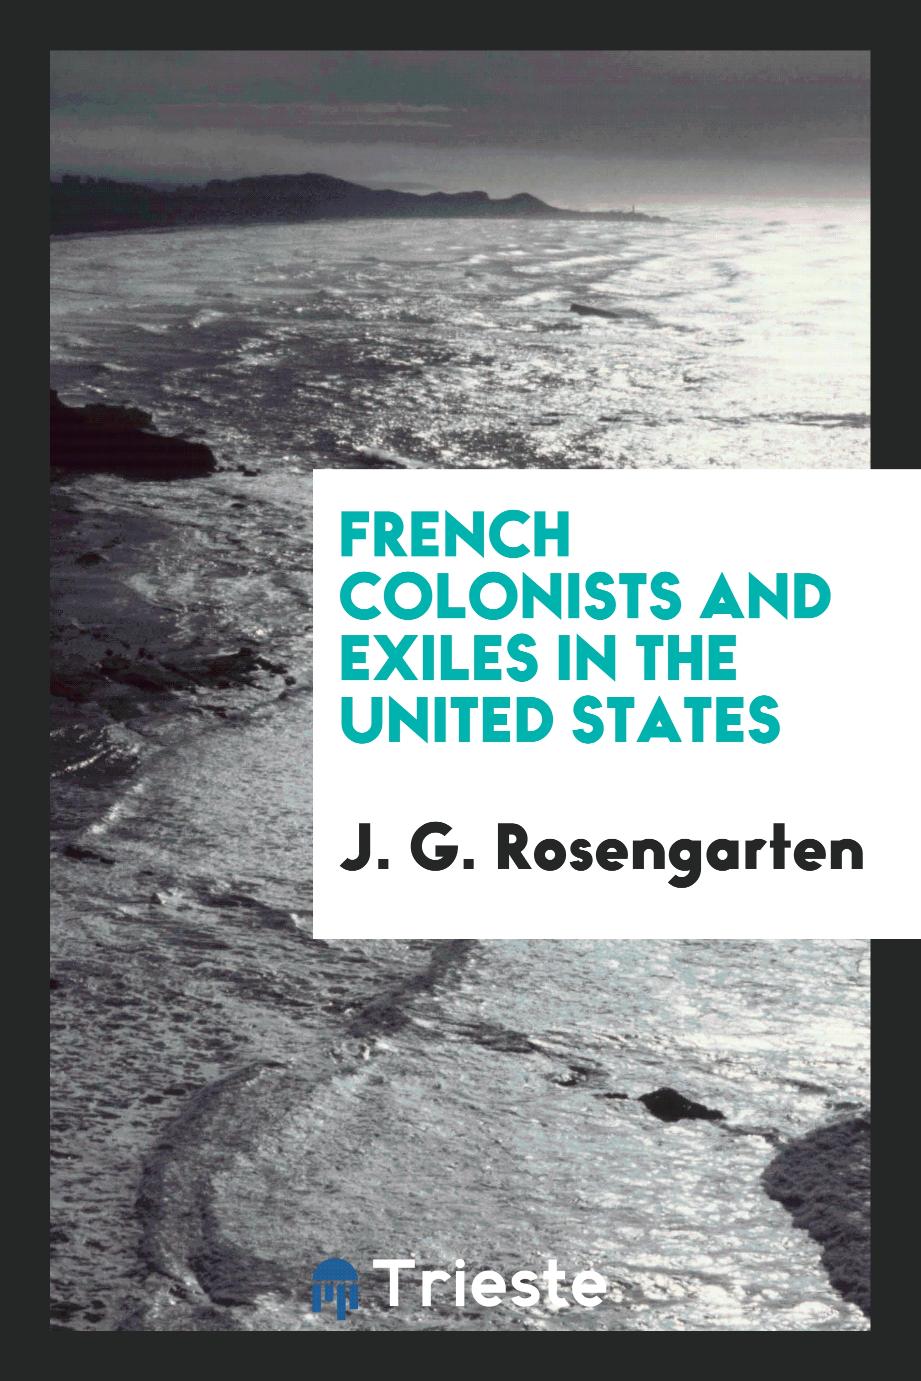 French colonists and exiles in the United States